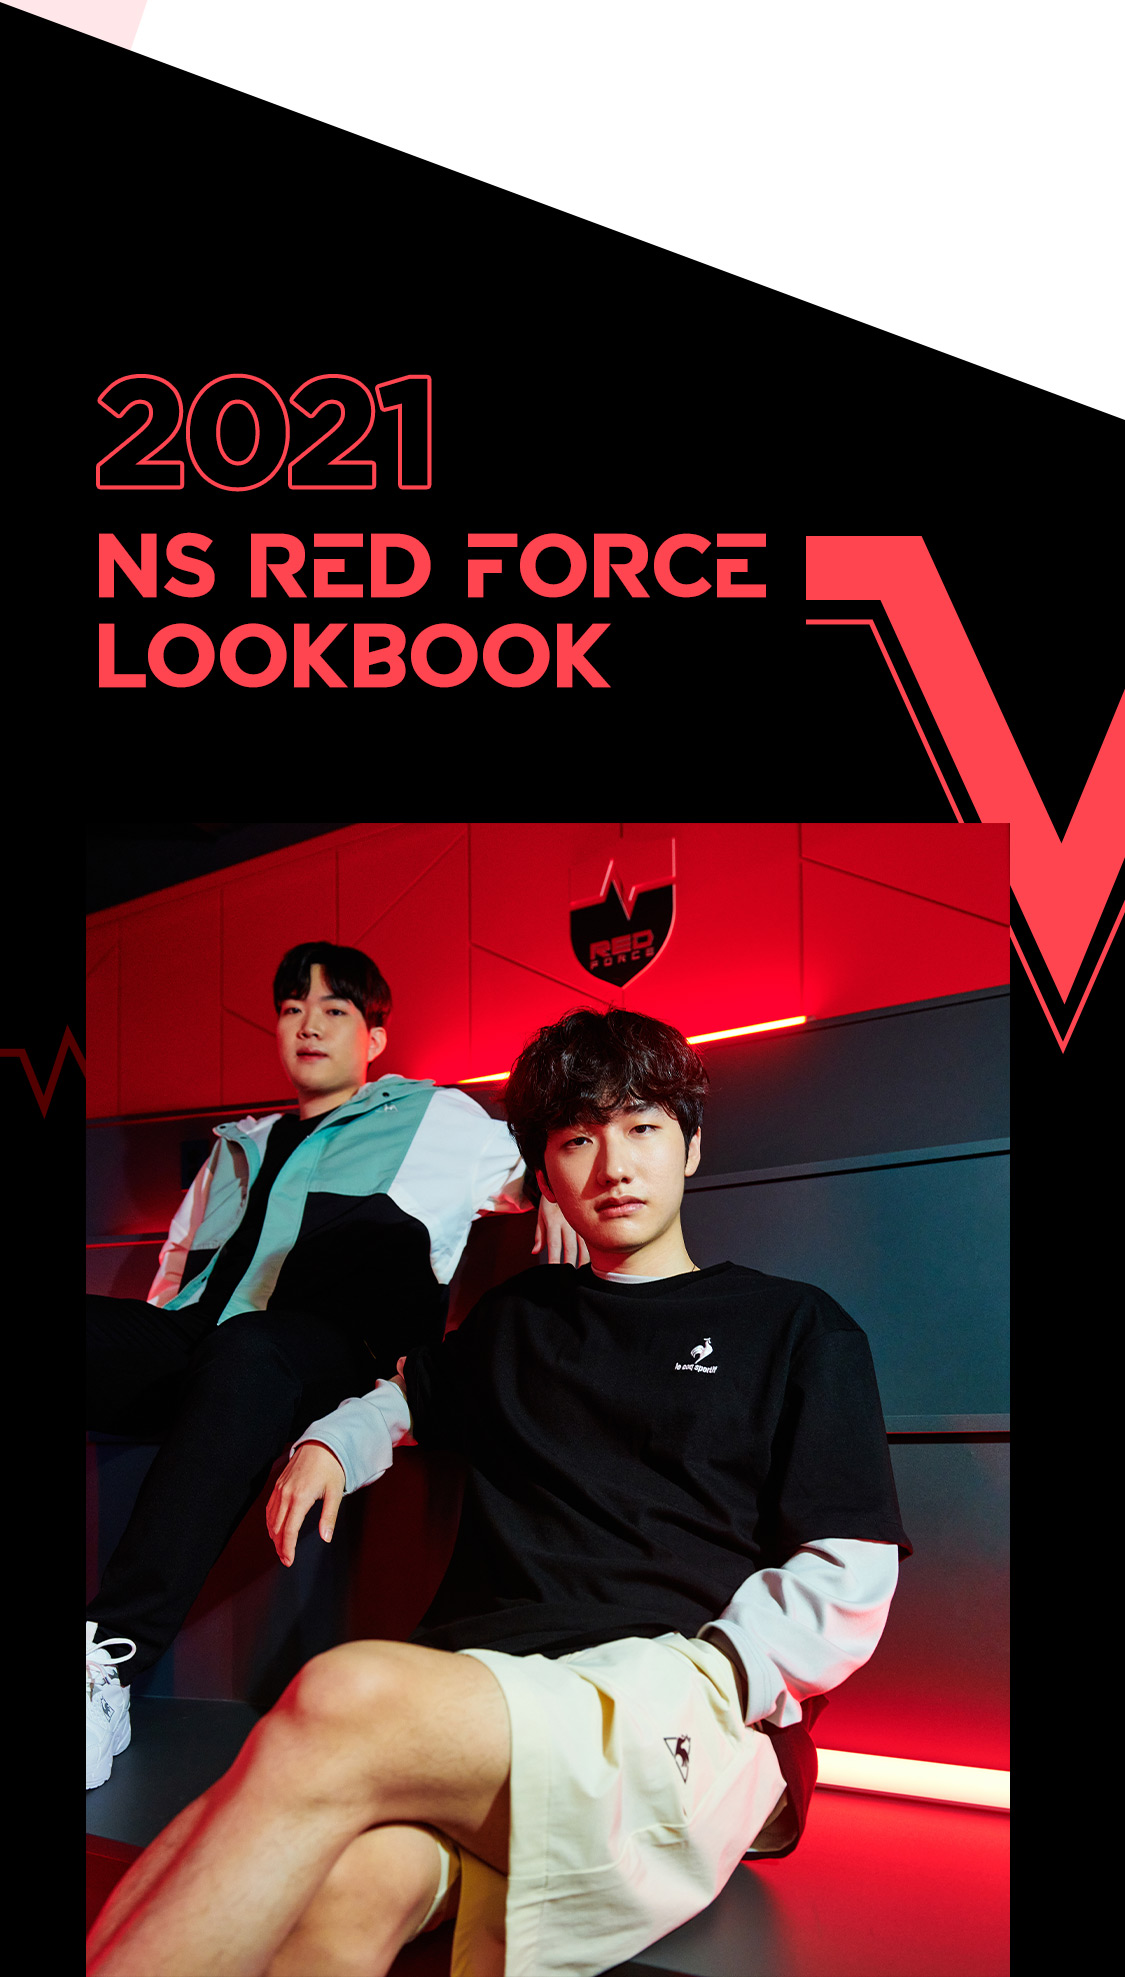 2021 NS RED FORCE LOOK BOOK